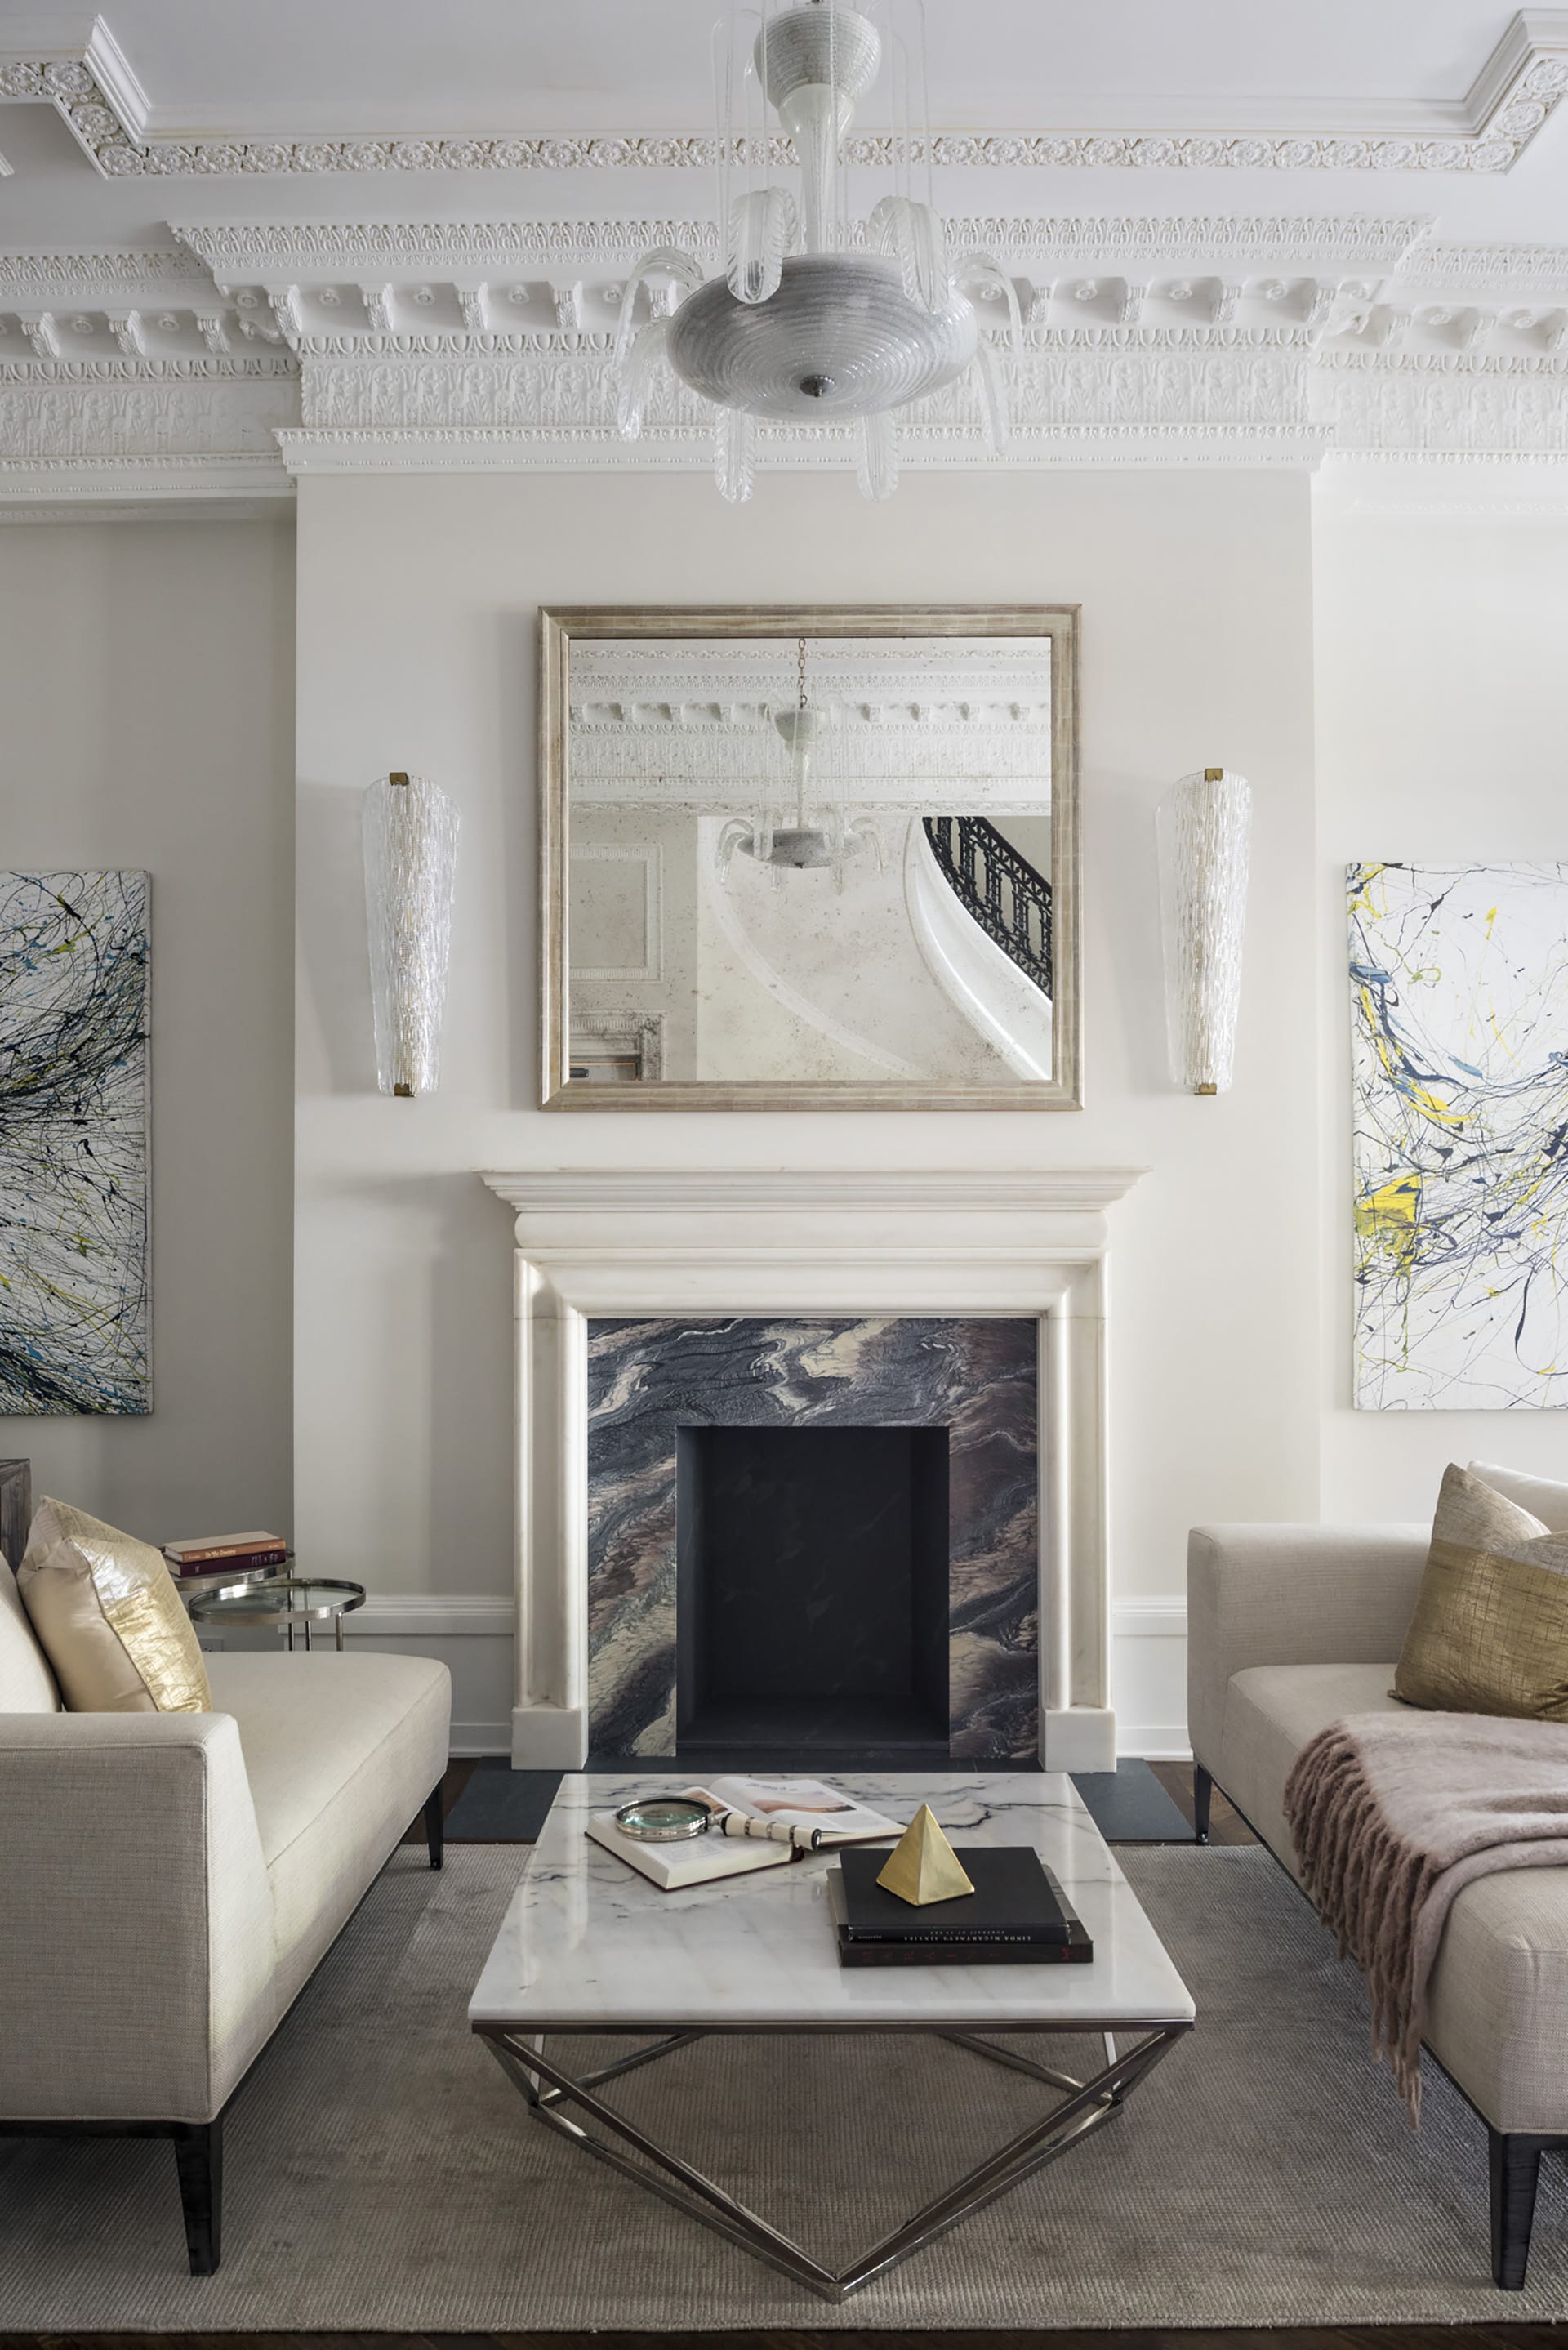 Marble fireplace with contemporary furnishings, a chandelier, and intricate crown molding details.